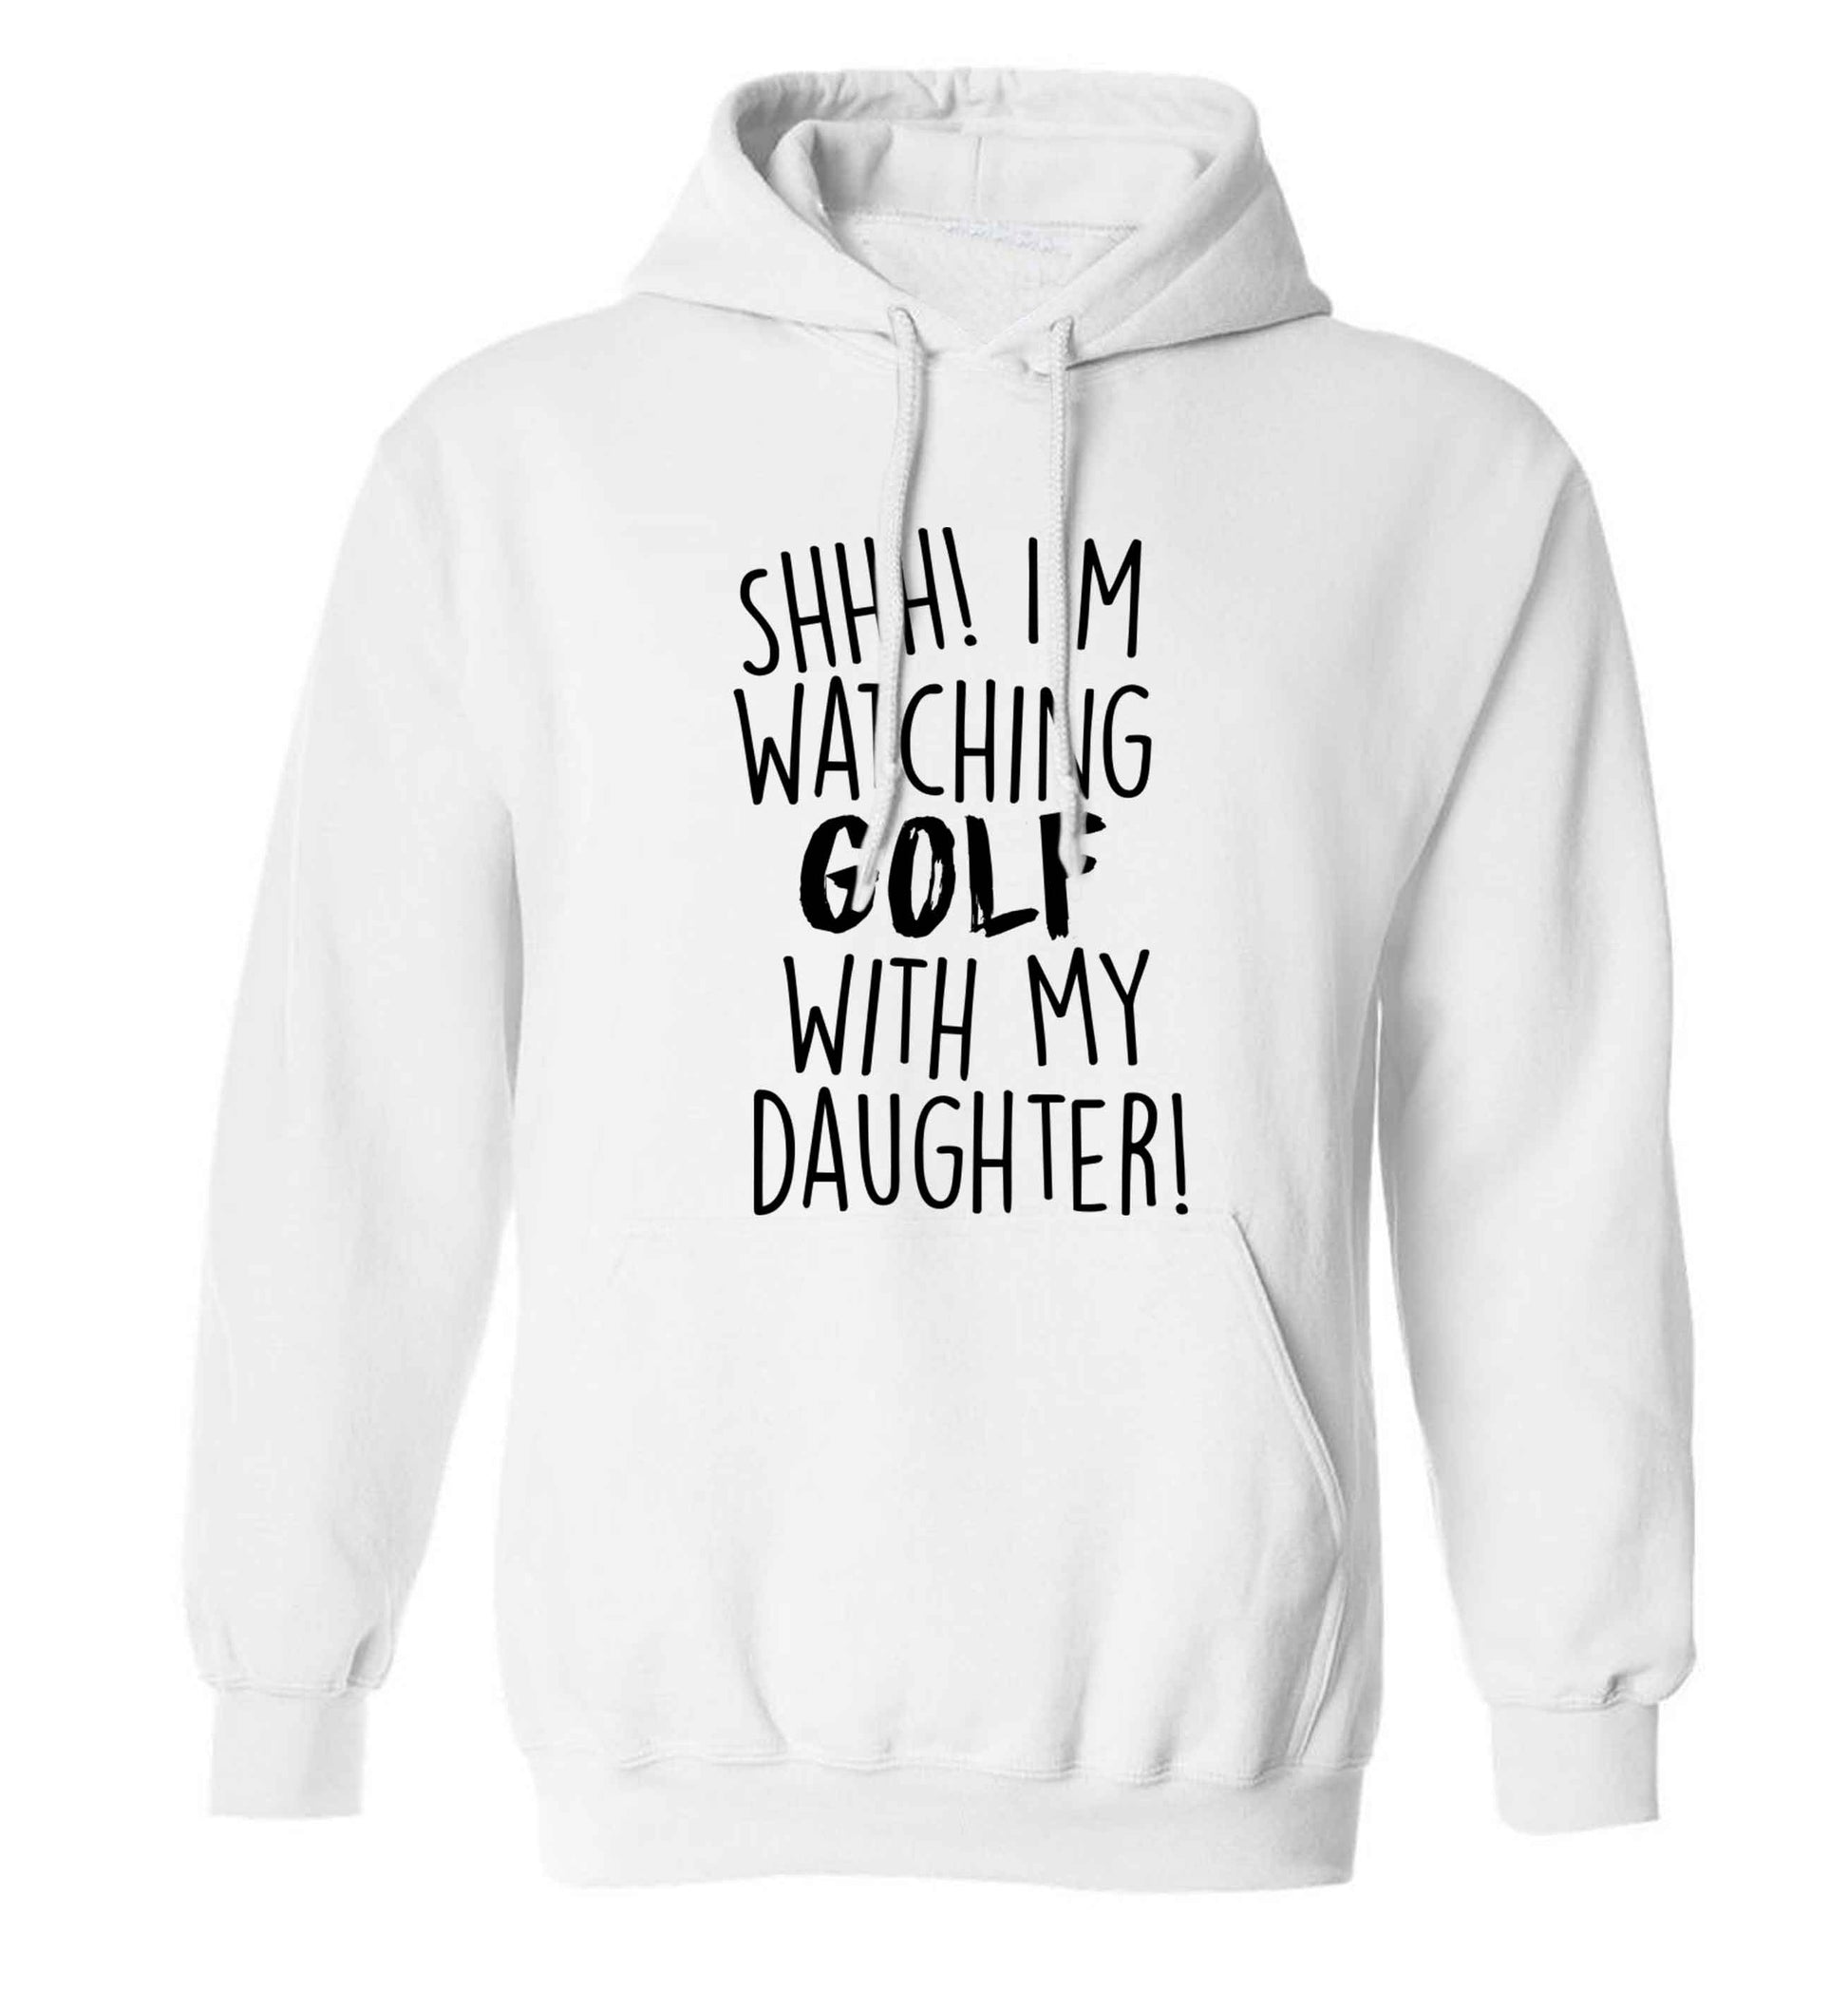 Shh I'm watching golf with my daughter adults unisex white hoodie 2XL